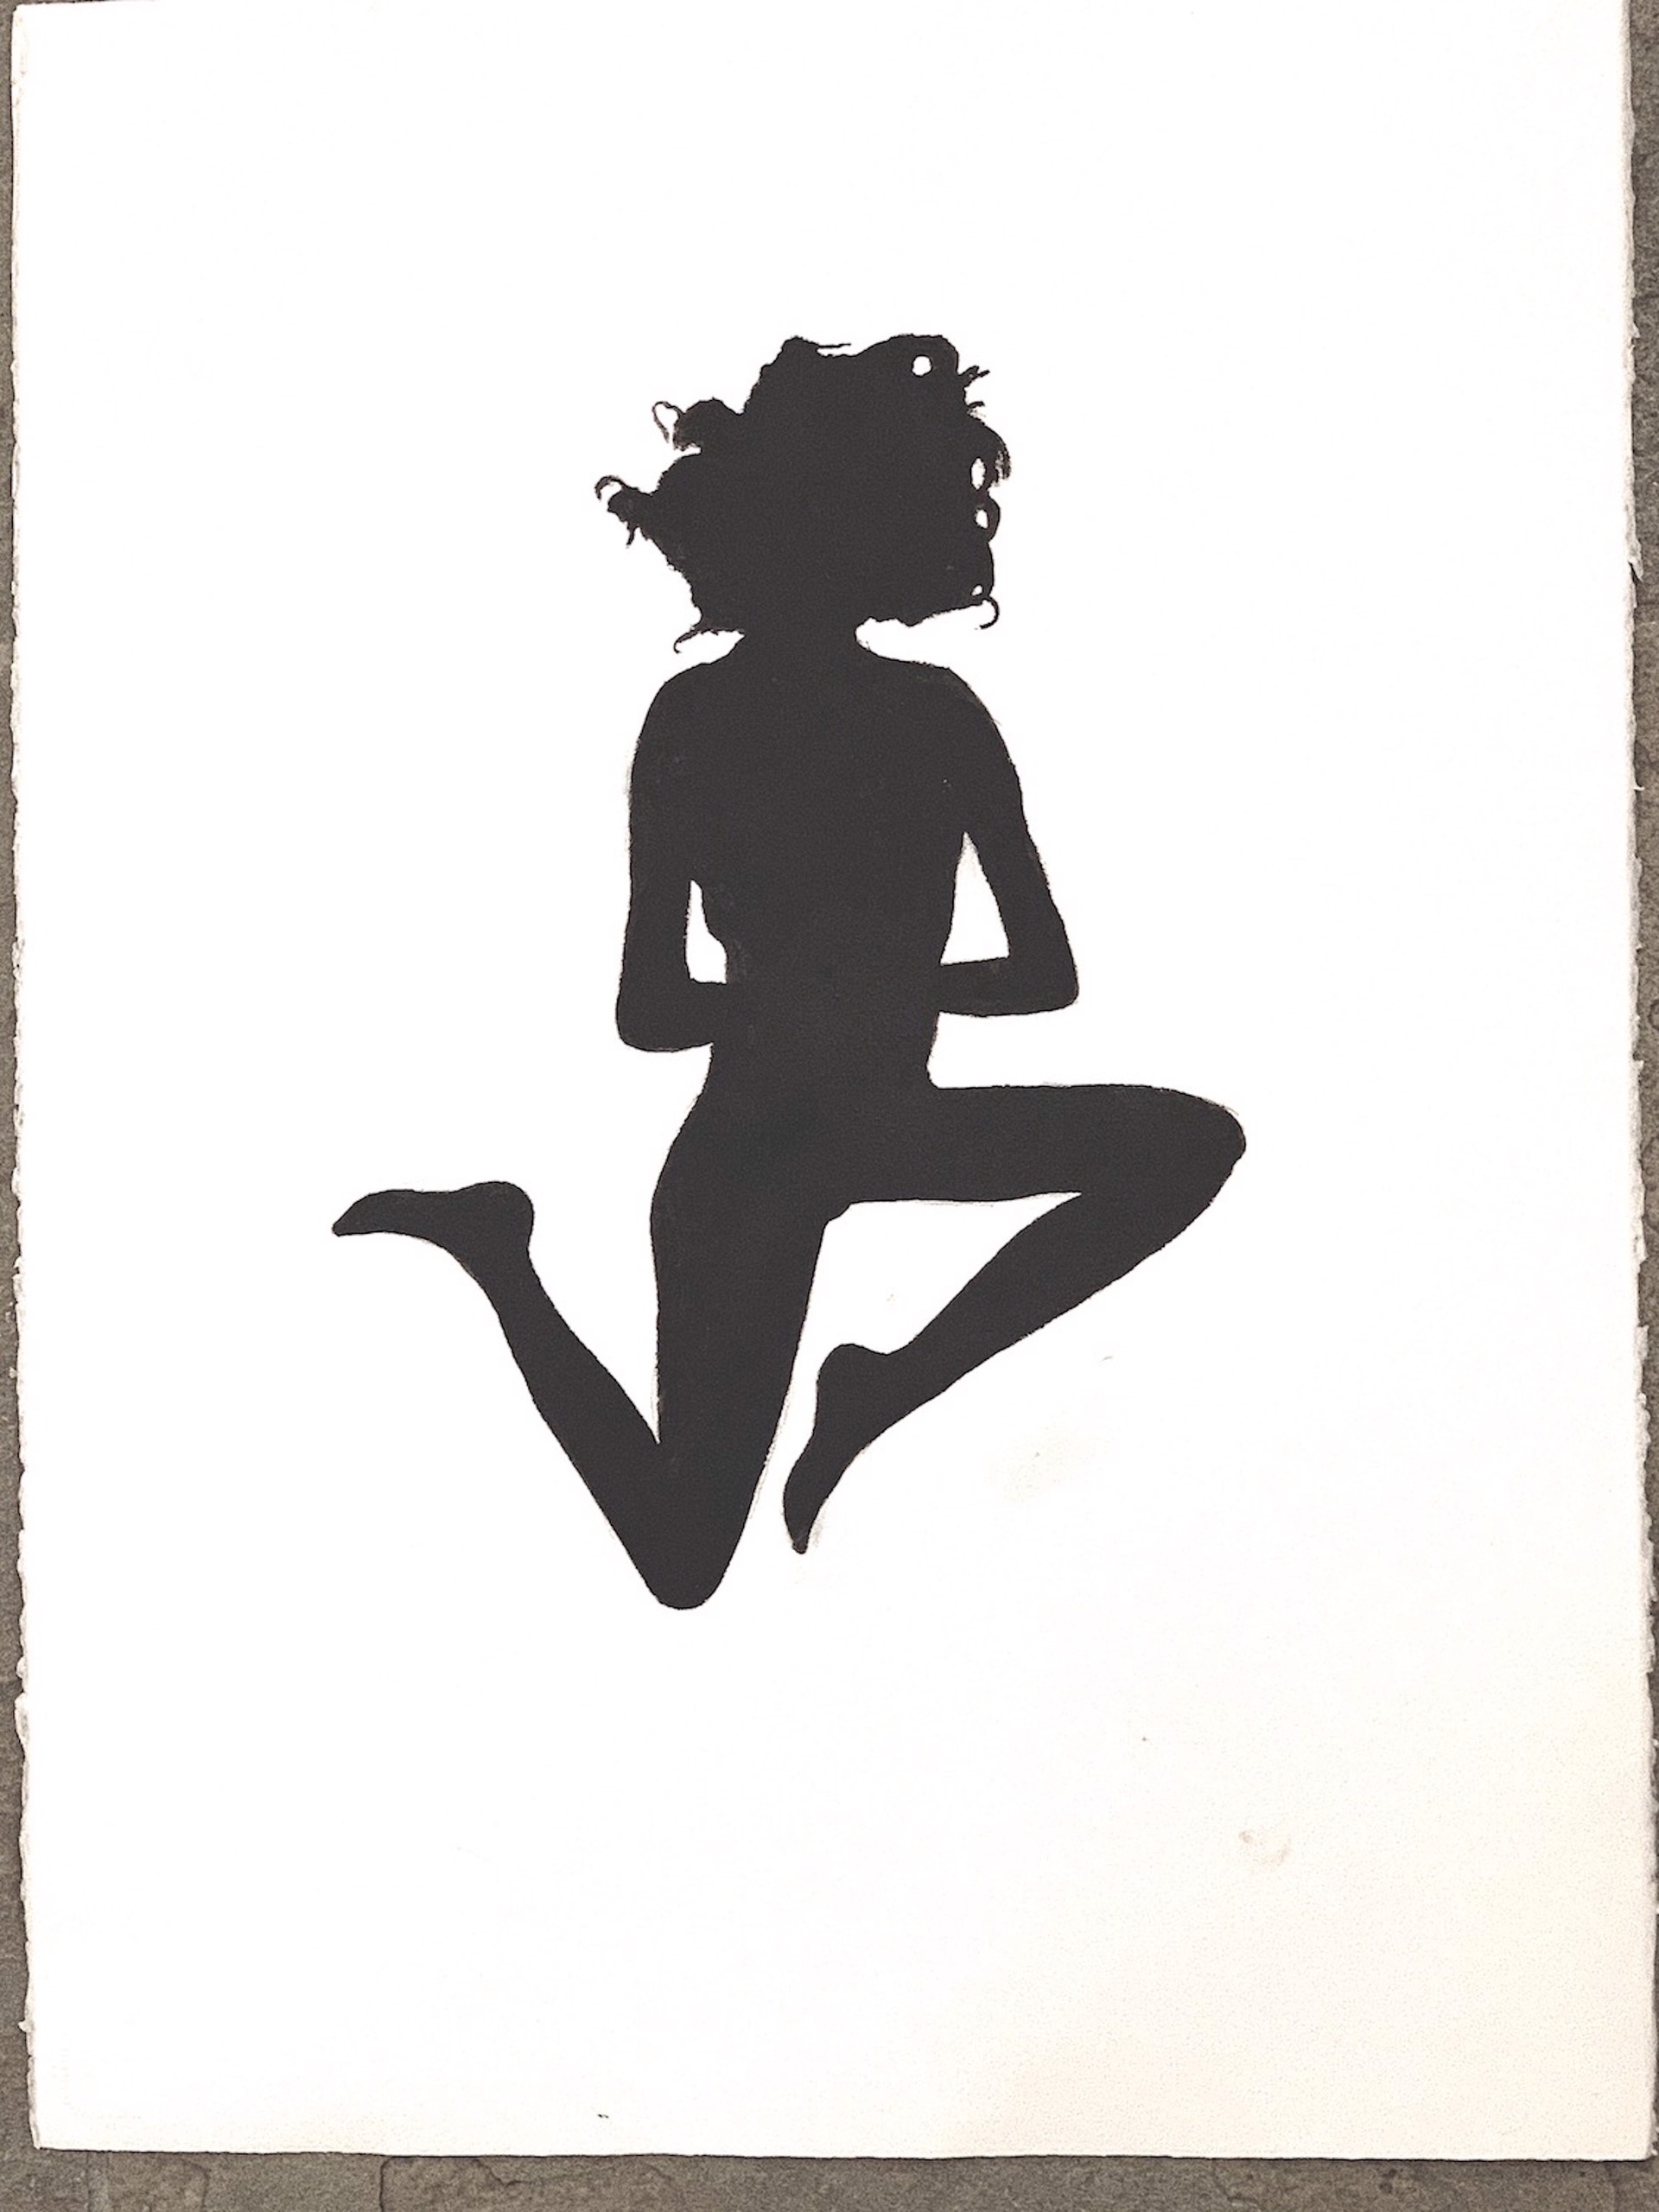 Jumping Girl (large) by Thomas Ostenberg